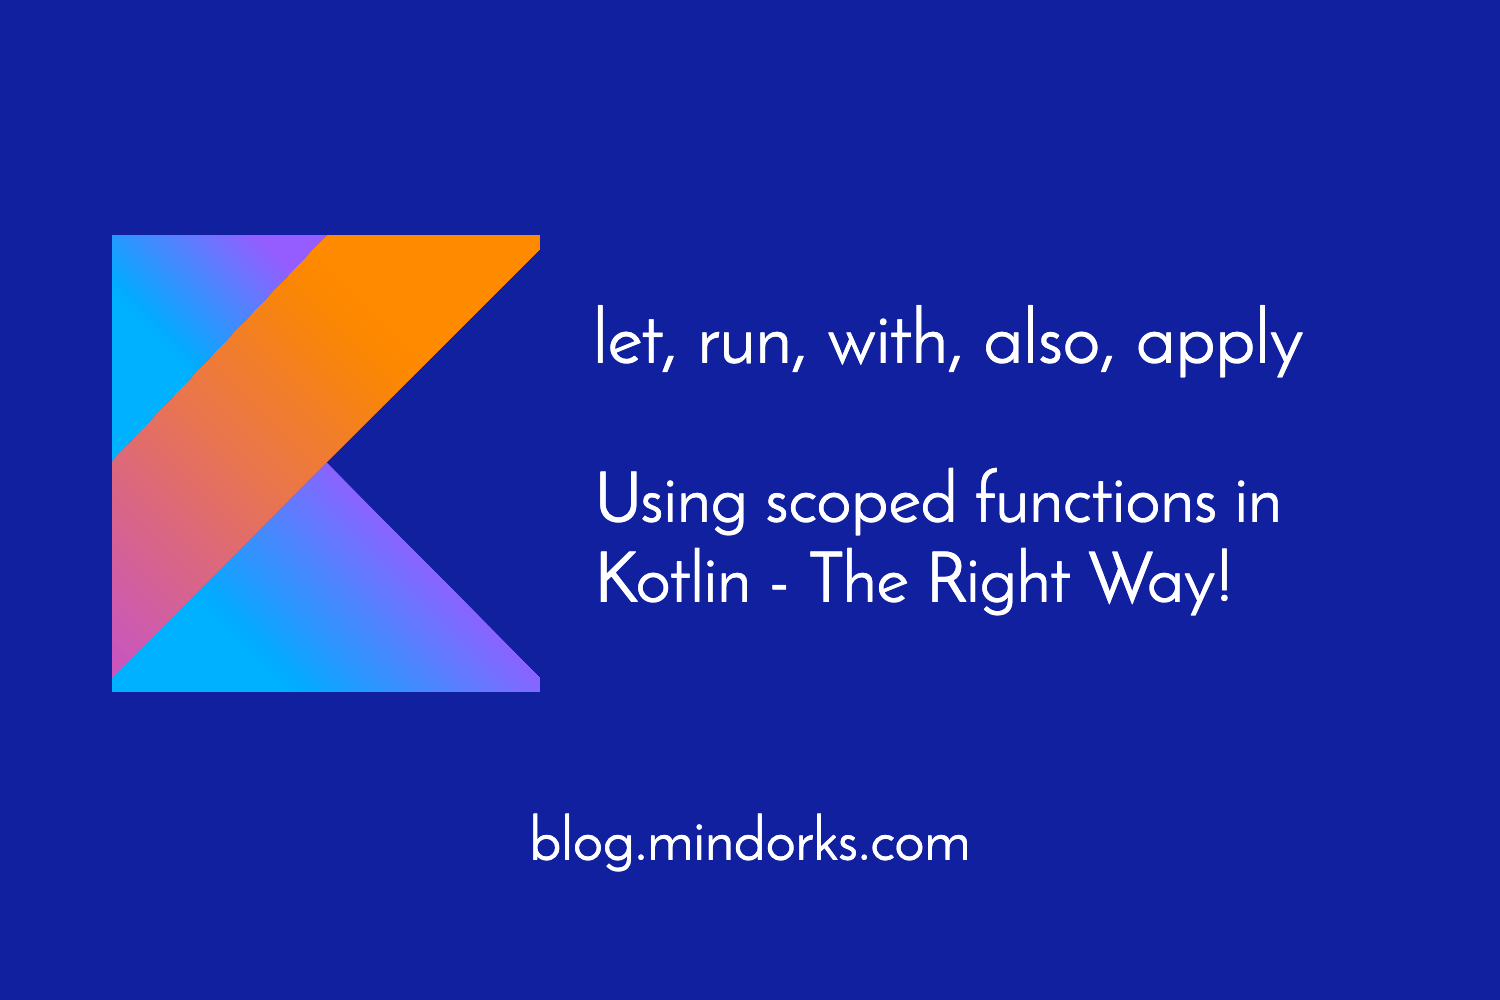 Using Scoped Functions in Kotlin - let, run, with, also, apply